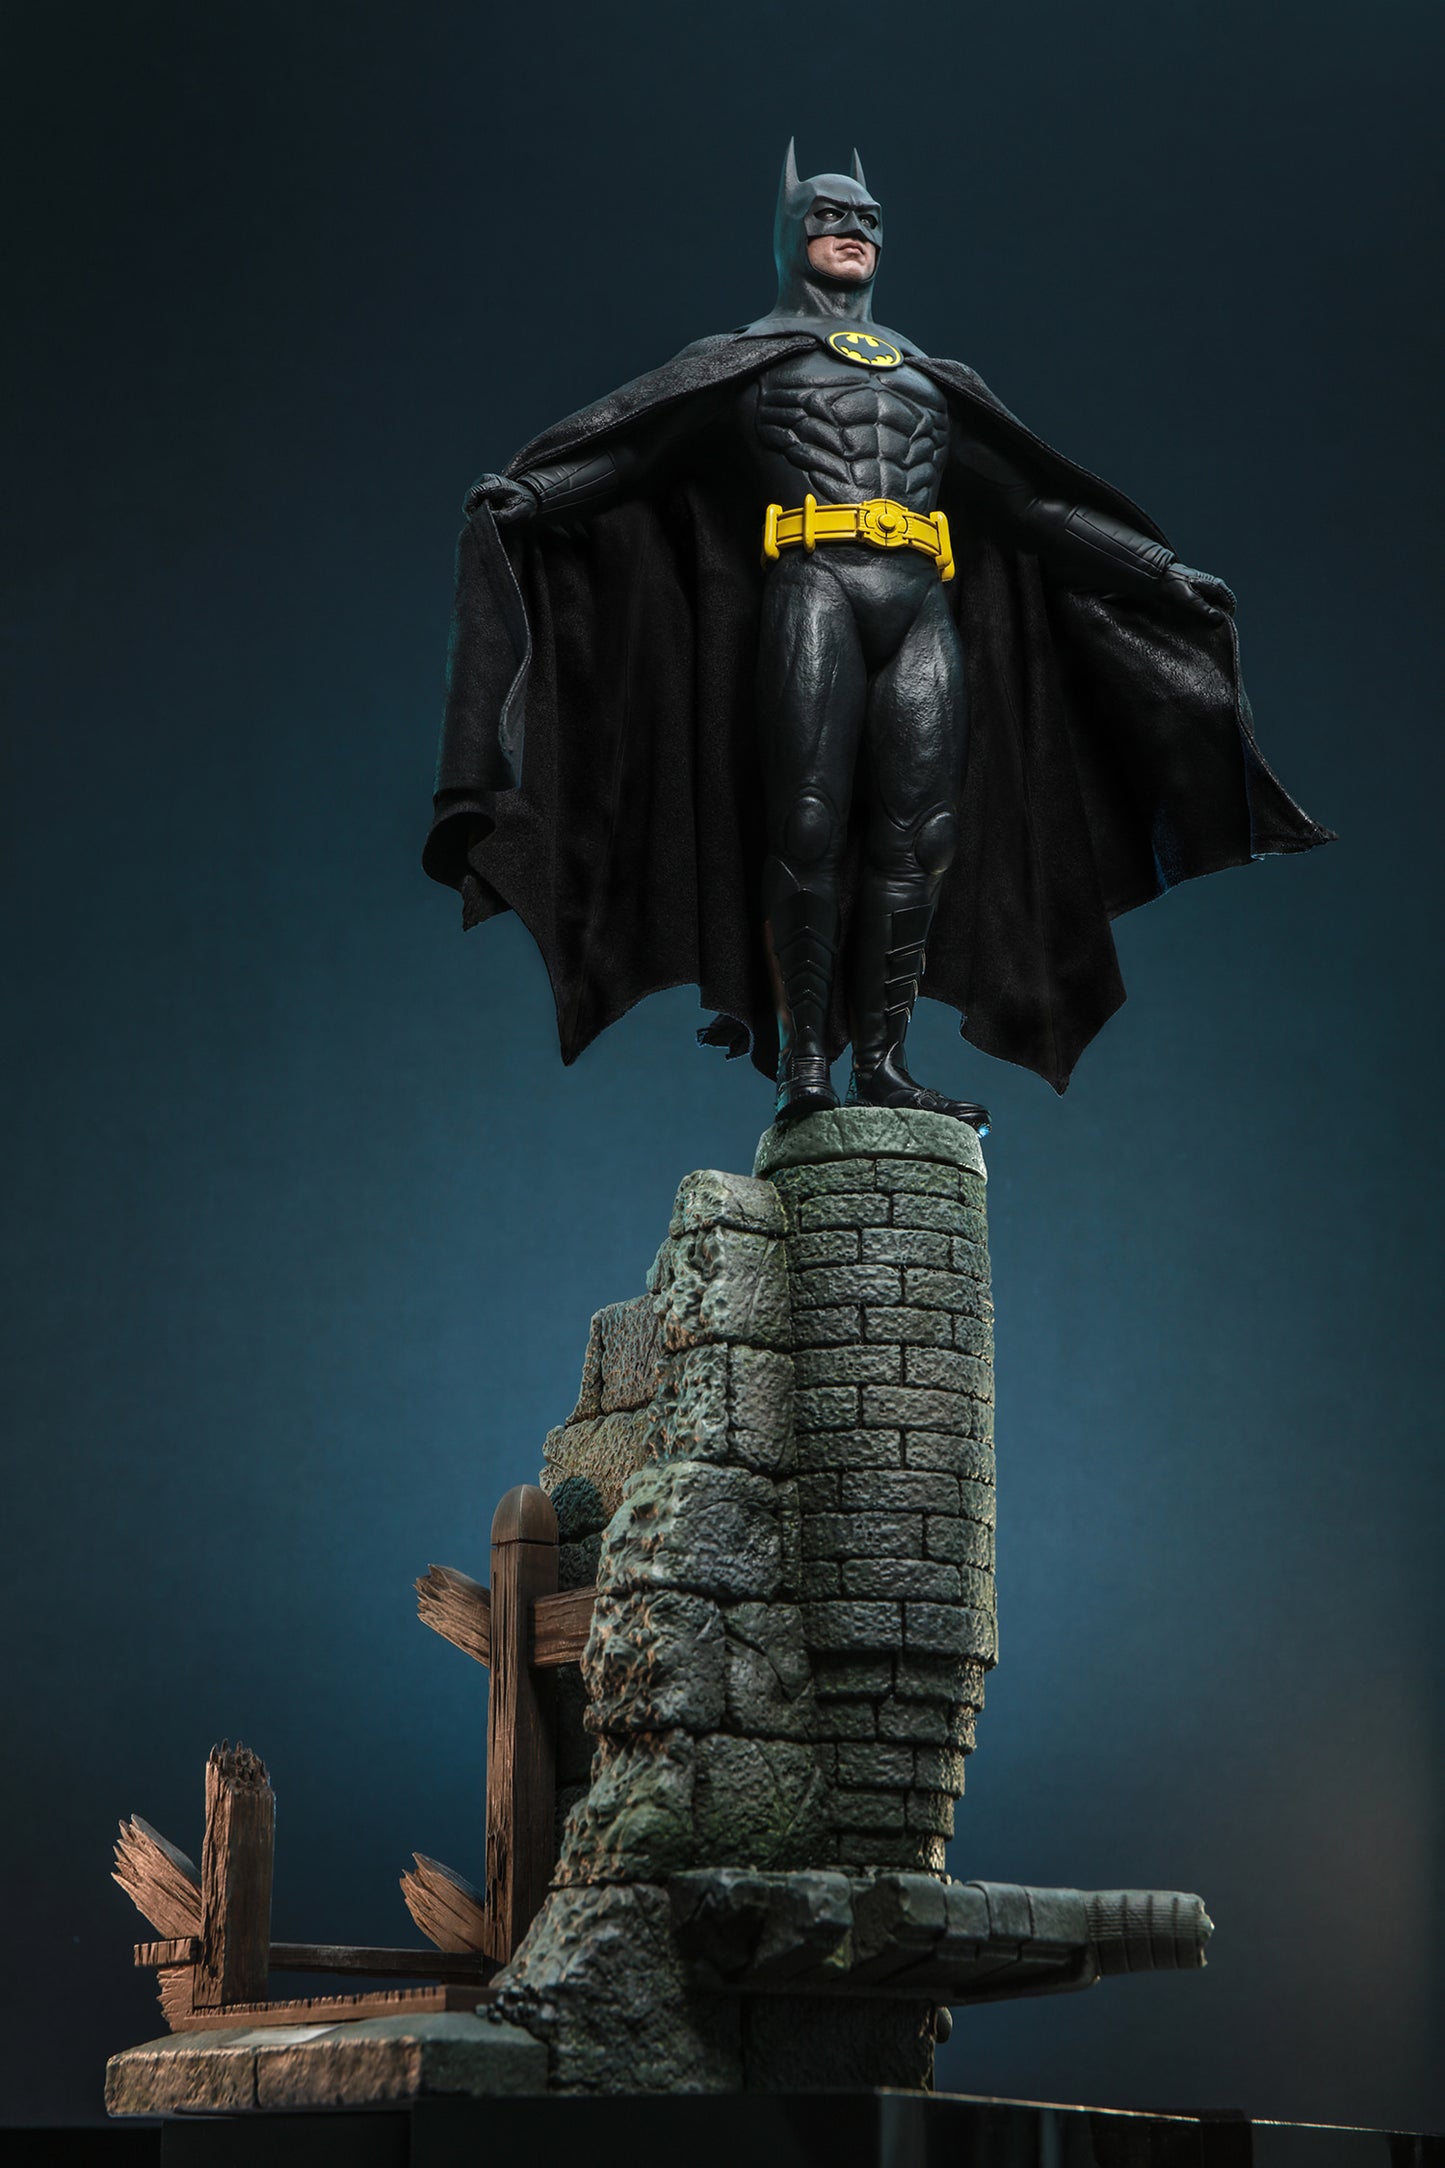 Batman (Deluxe Version) Sixth Scale Figure by Hot Toys